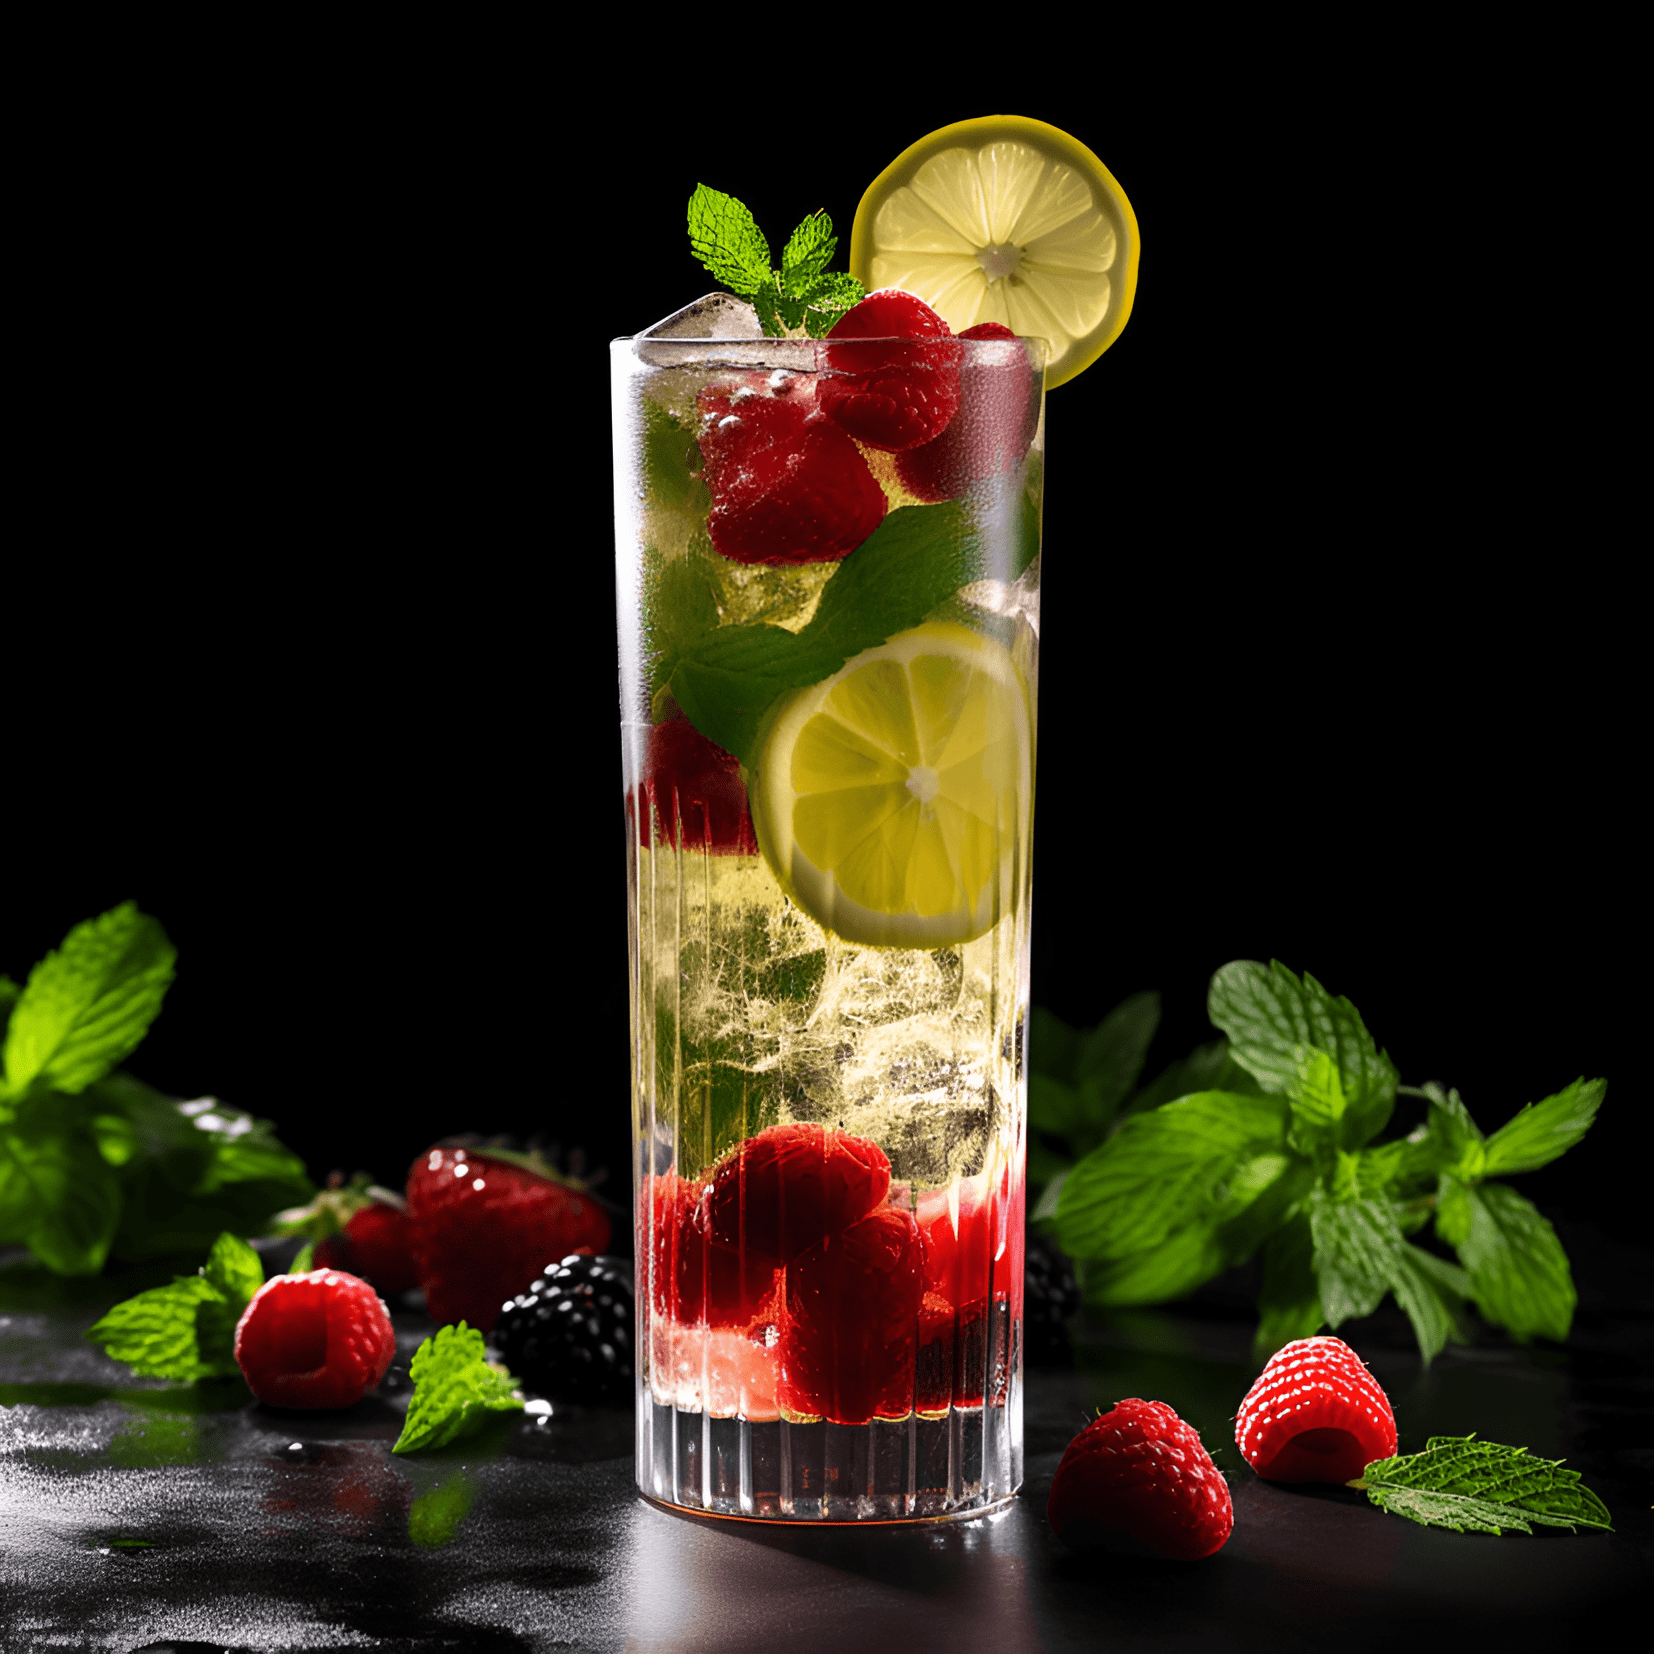 Wimbledon Cocktail Recipe - The Wimbledon cocktail is a delightful mix of fruity, sweet, and slightly bitter flavors. The Pimm's adds a herbal and spicy touch, while the strawberries and mint provide a refreshing and juicy sweetness. The lemon juice and ginger ale give it a zesty and effervescent finish, making it a perfect summer drink.